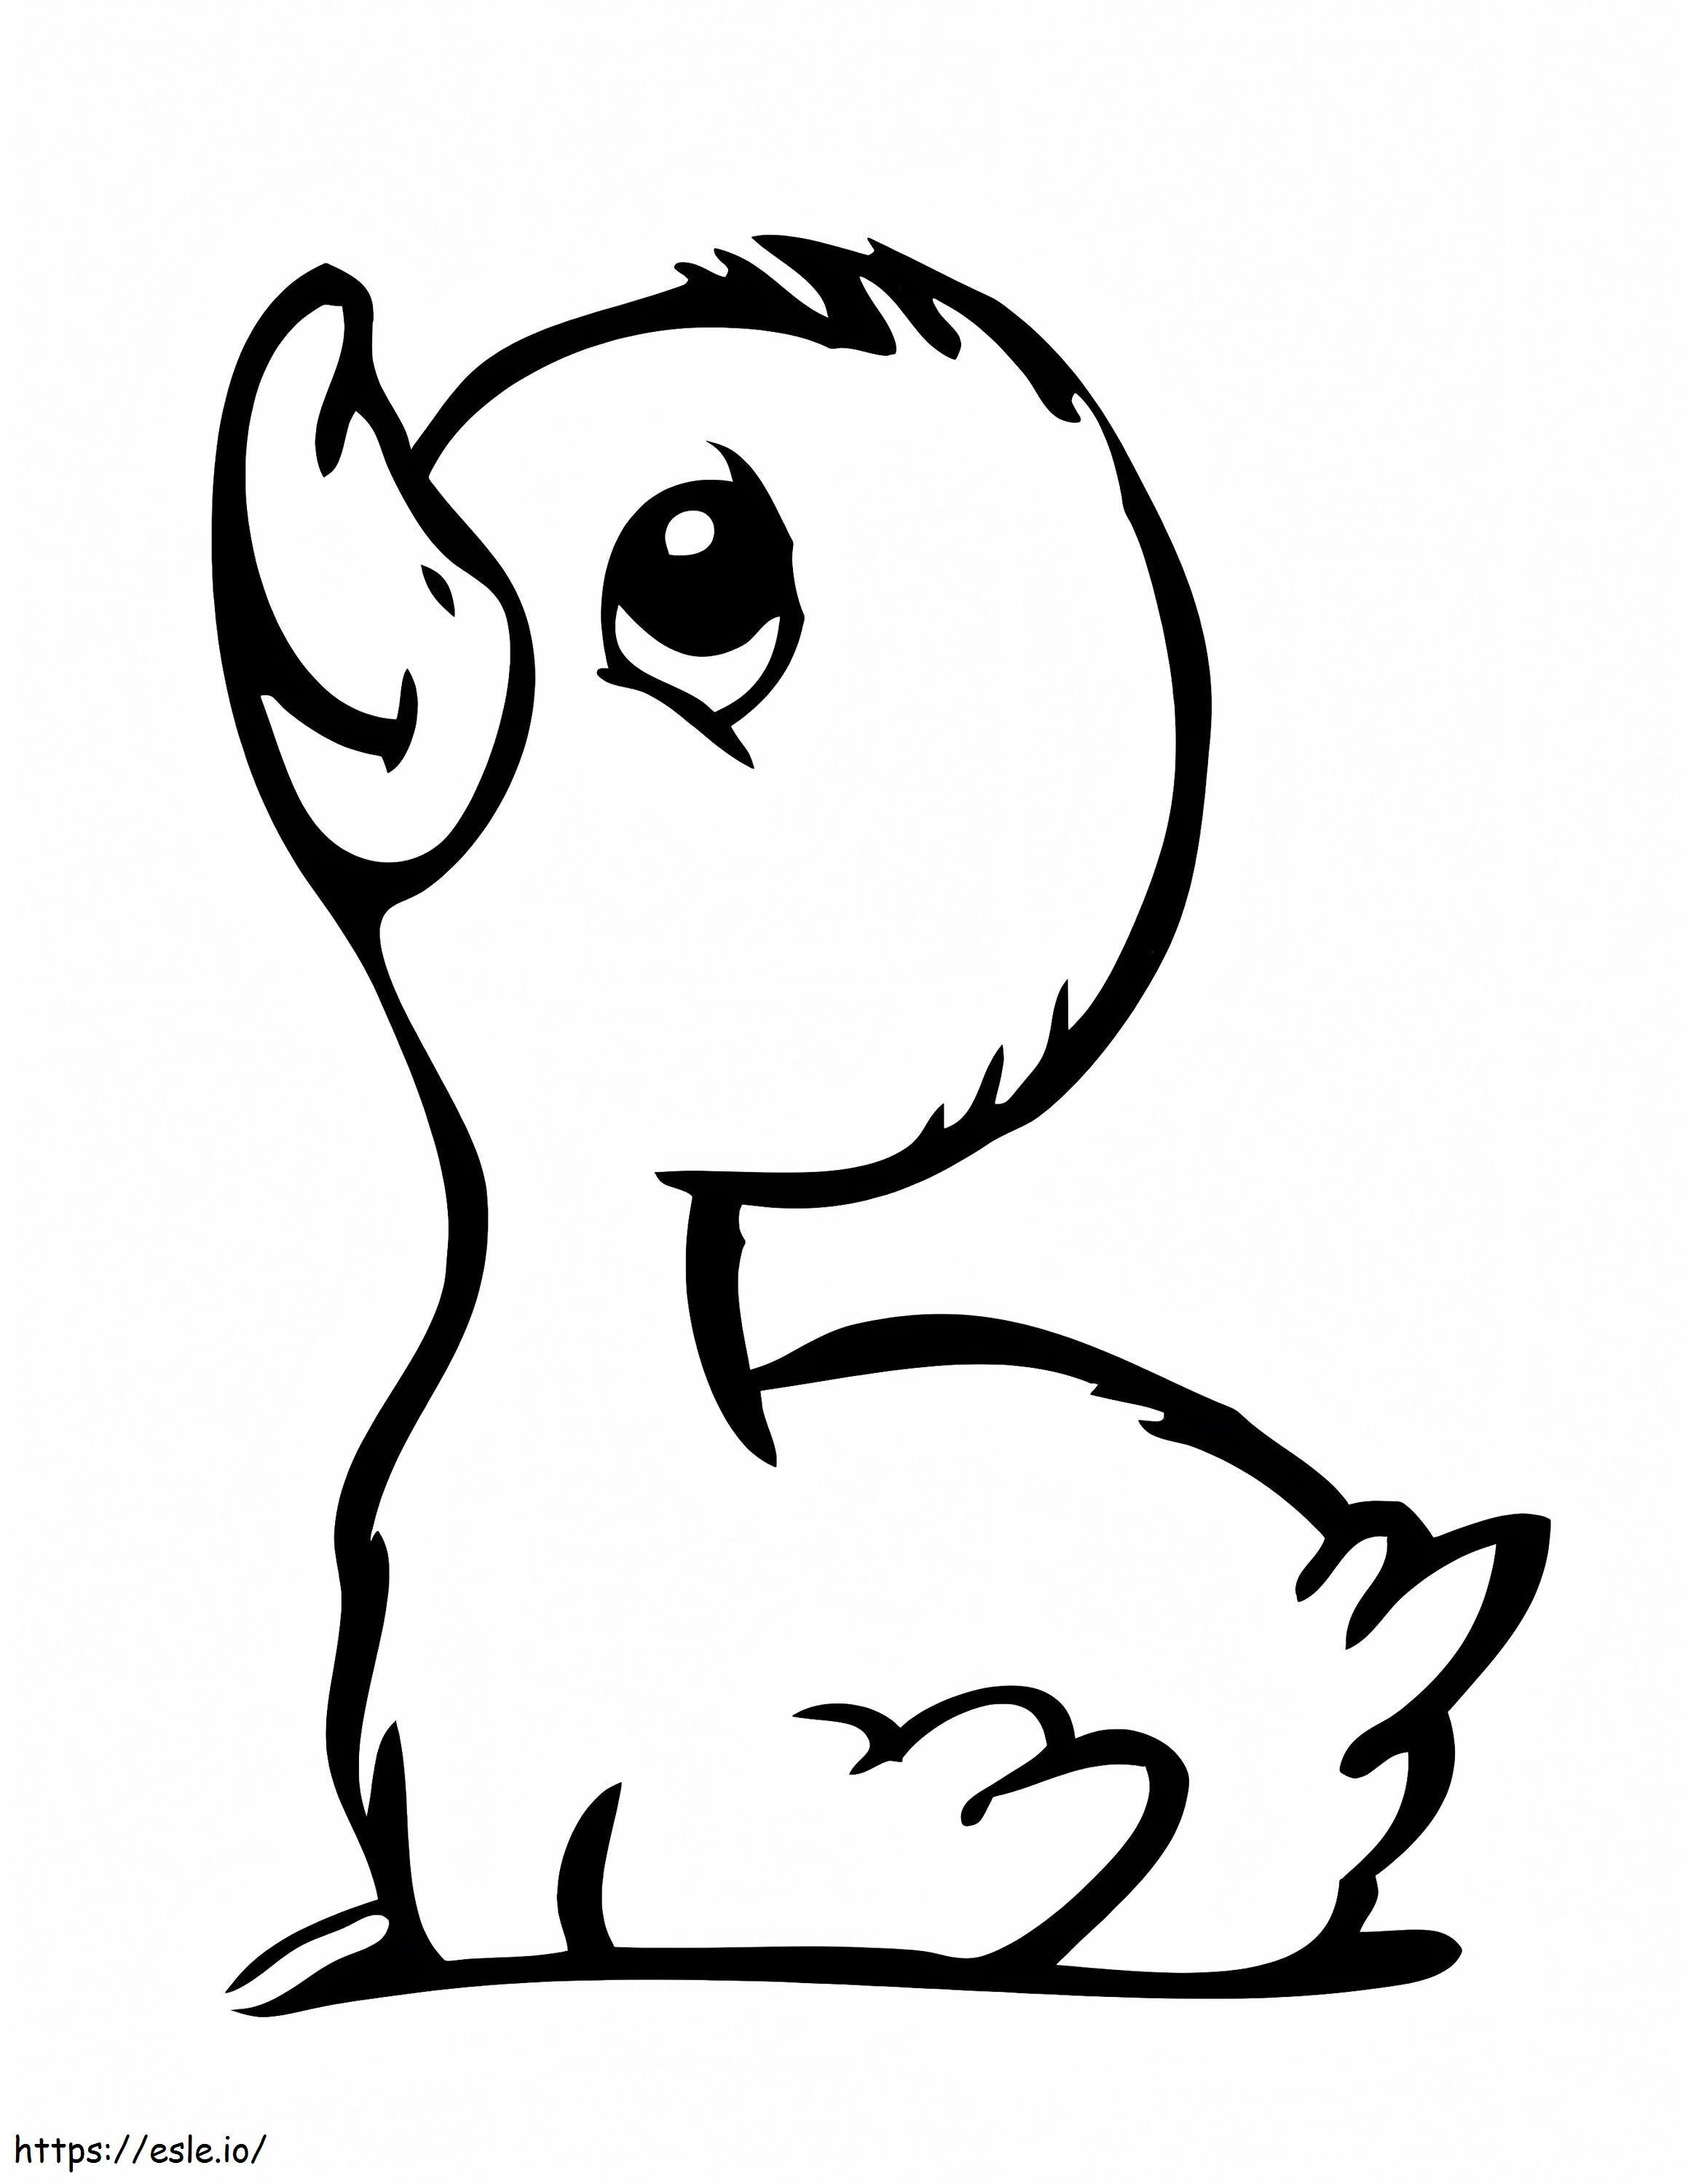 Duckling 3 coloring page